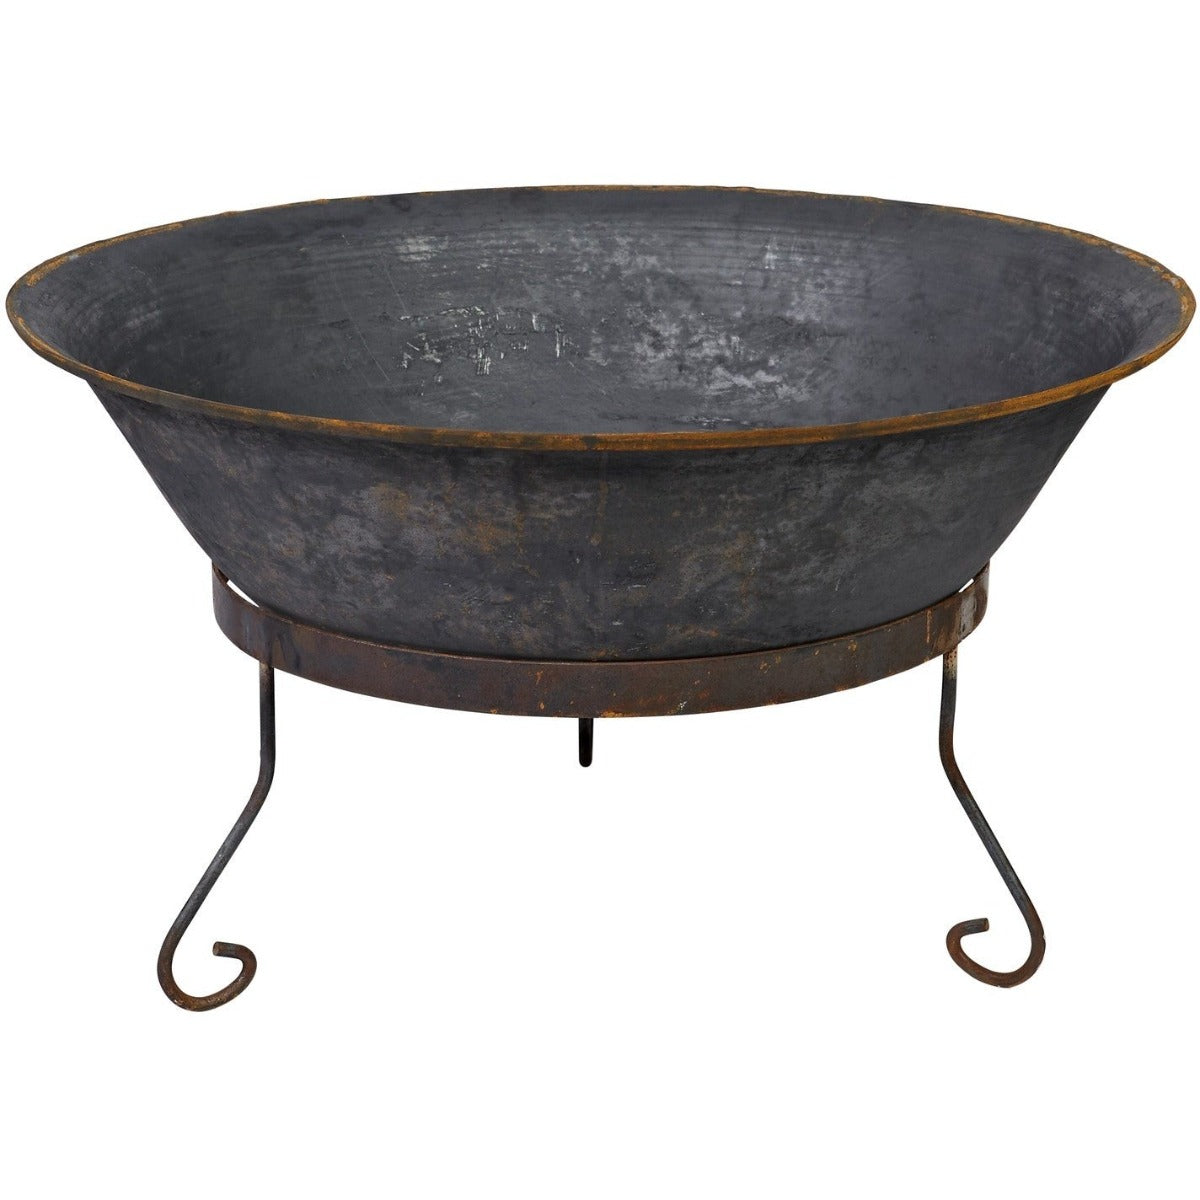 90cm Cast Iron Fire Pit Bowl with Stand - Razzino Furniture